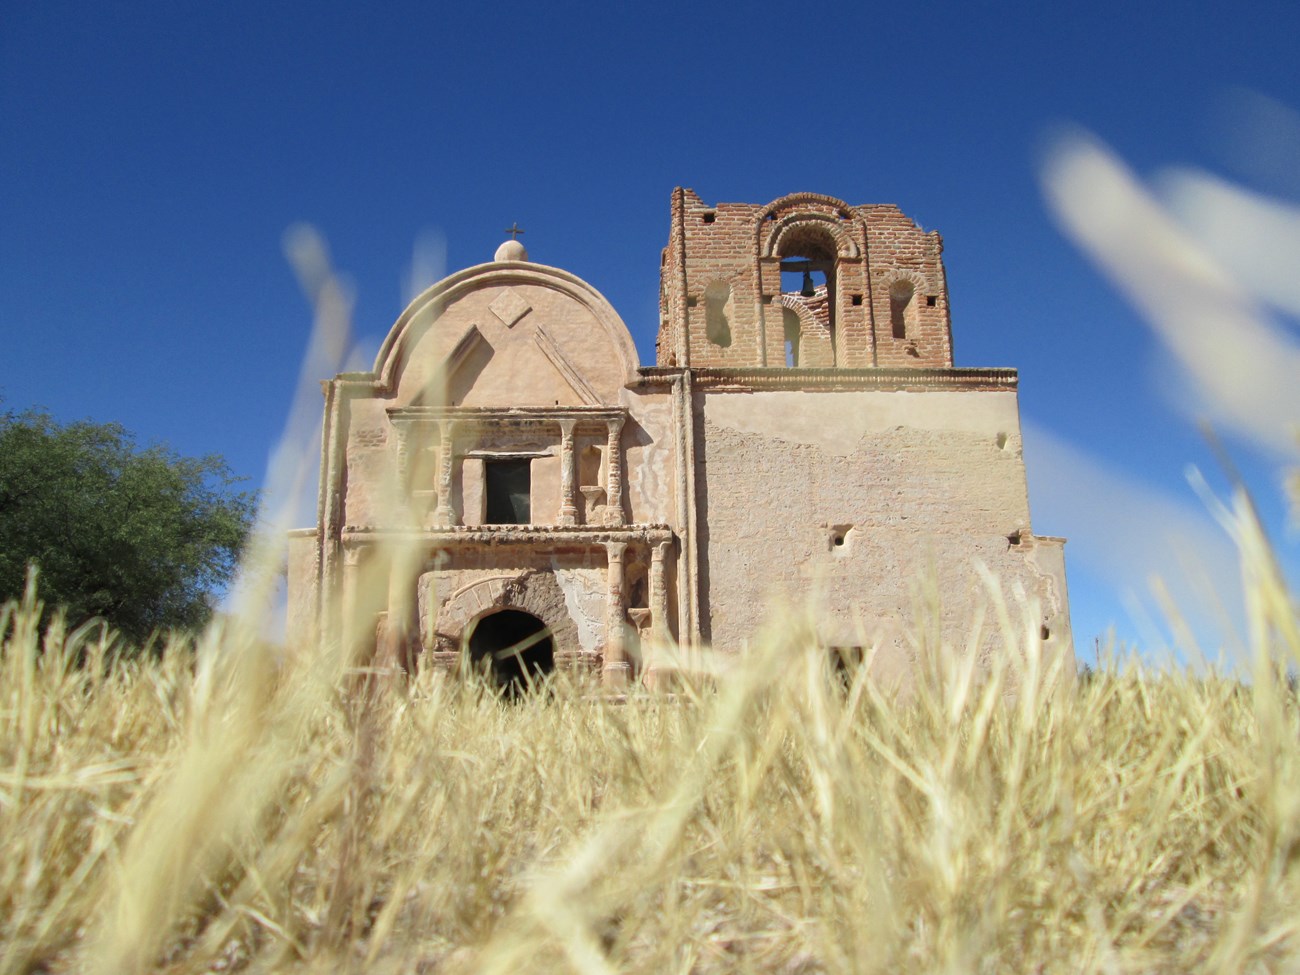 Photograph looking up to an adobe church from the ground with dry grass.